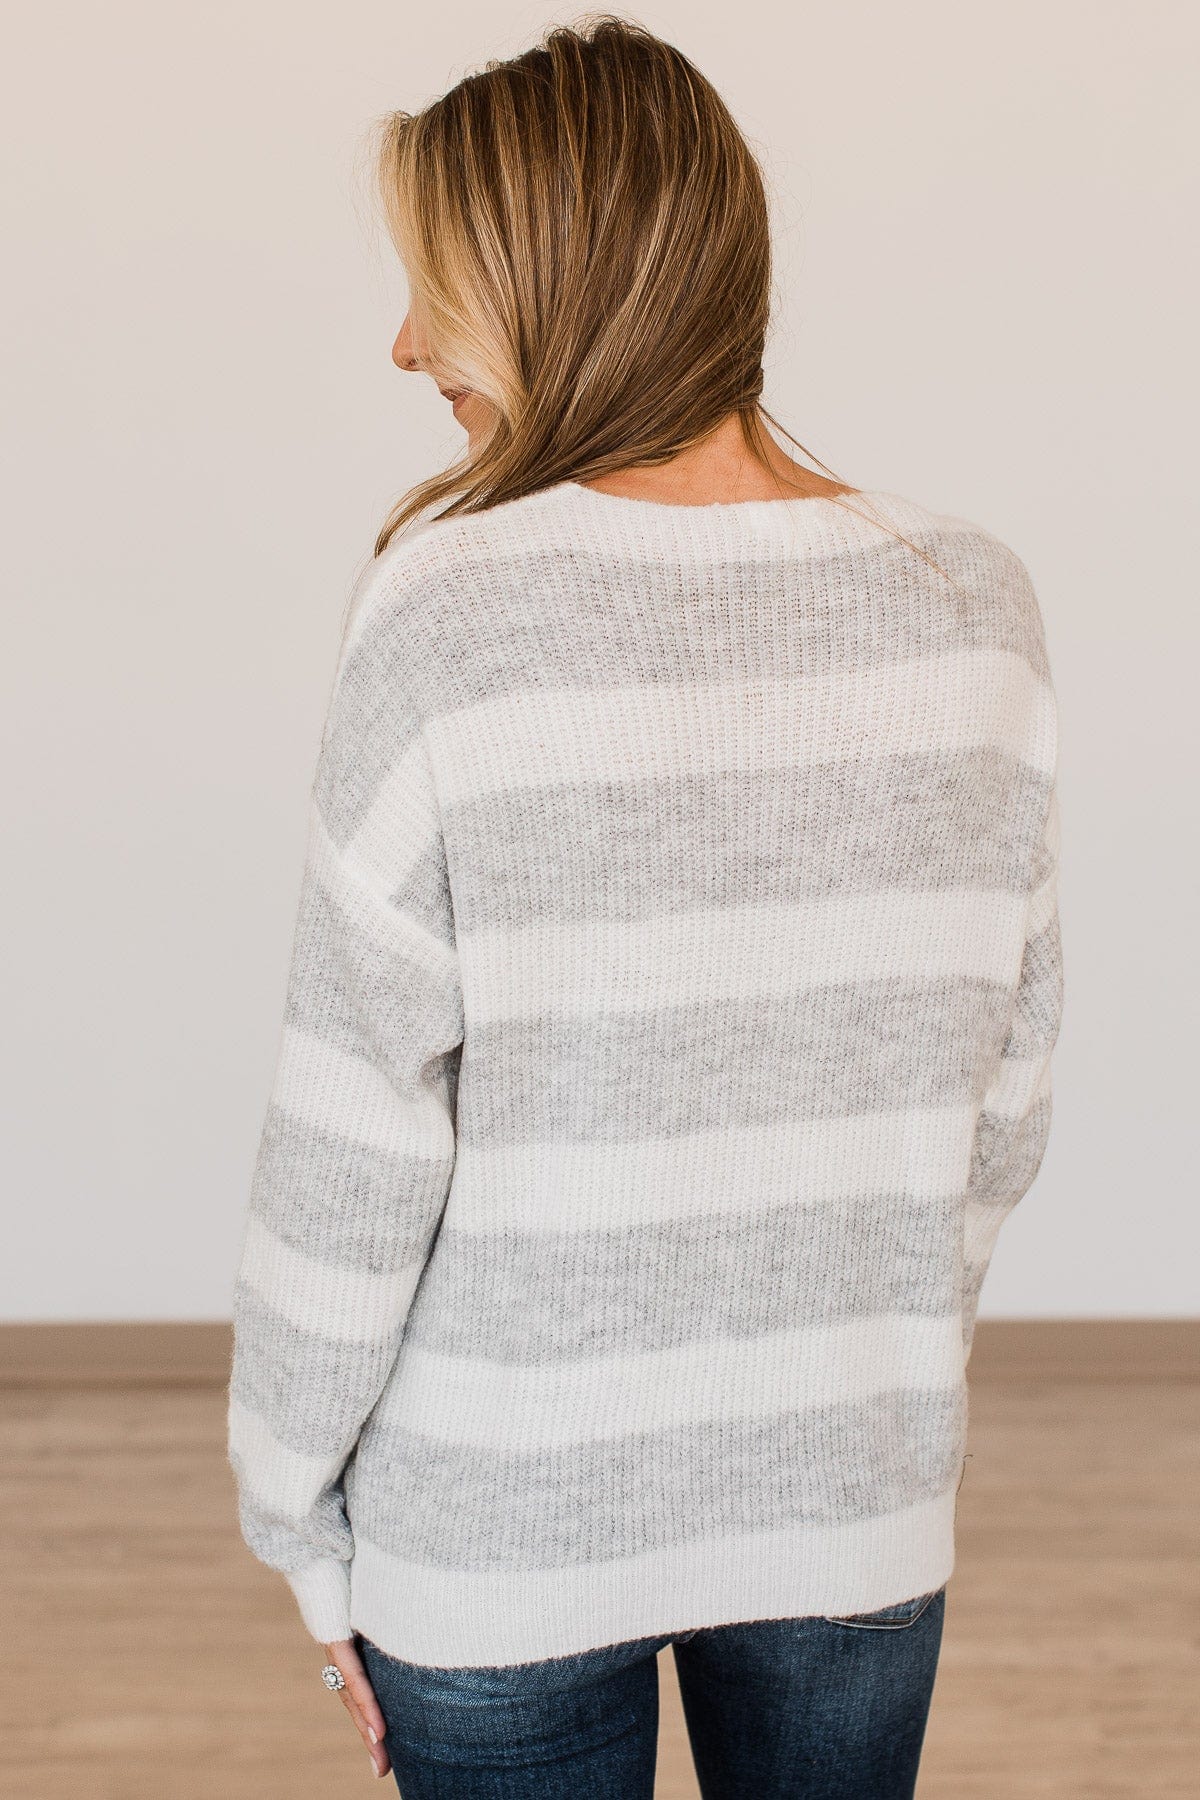 Perfectly Me Knit Sweater- Grey & Off-White